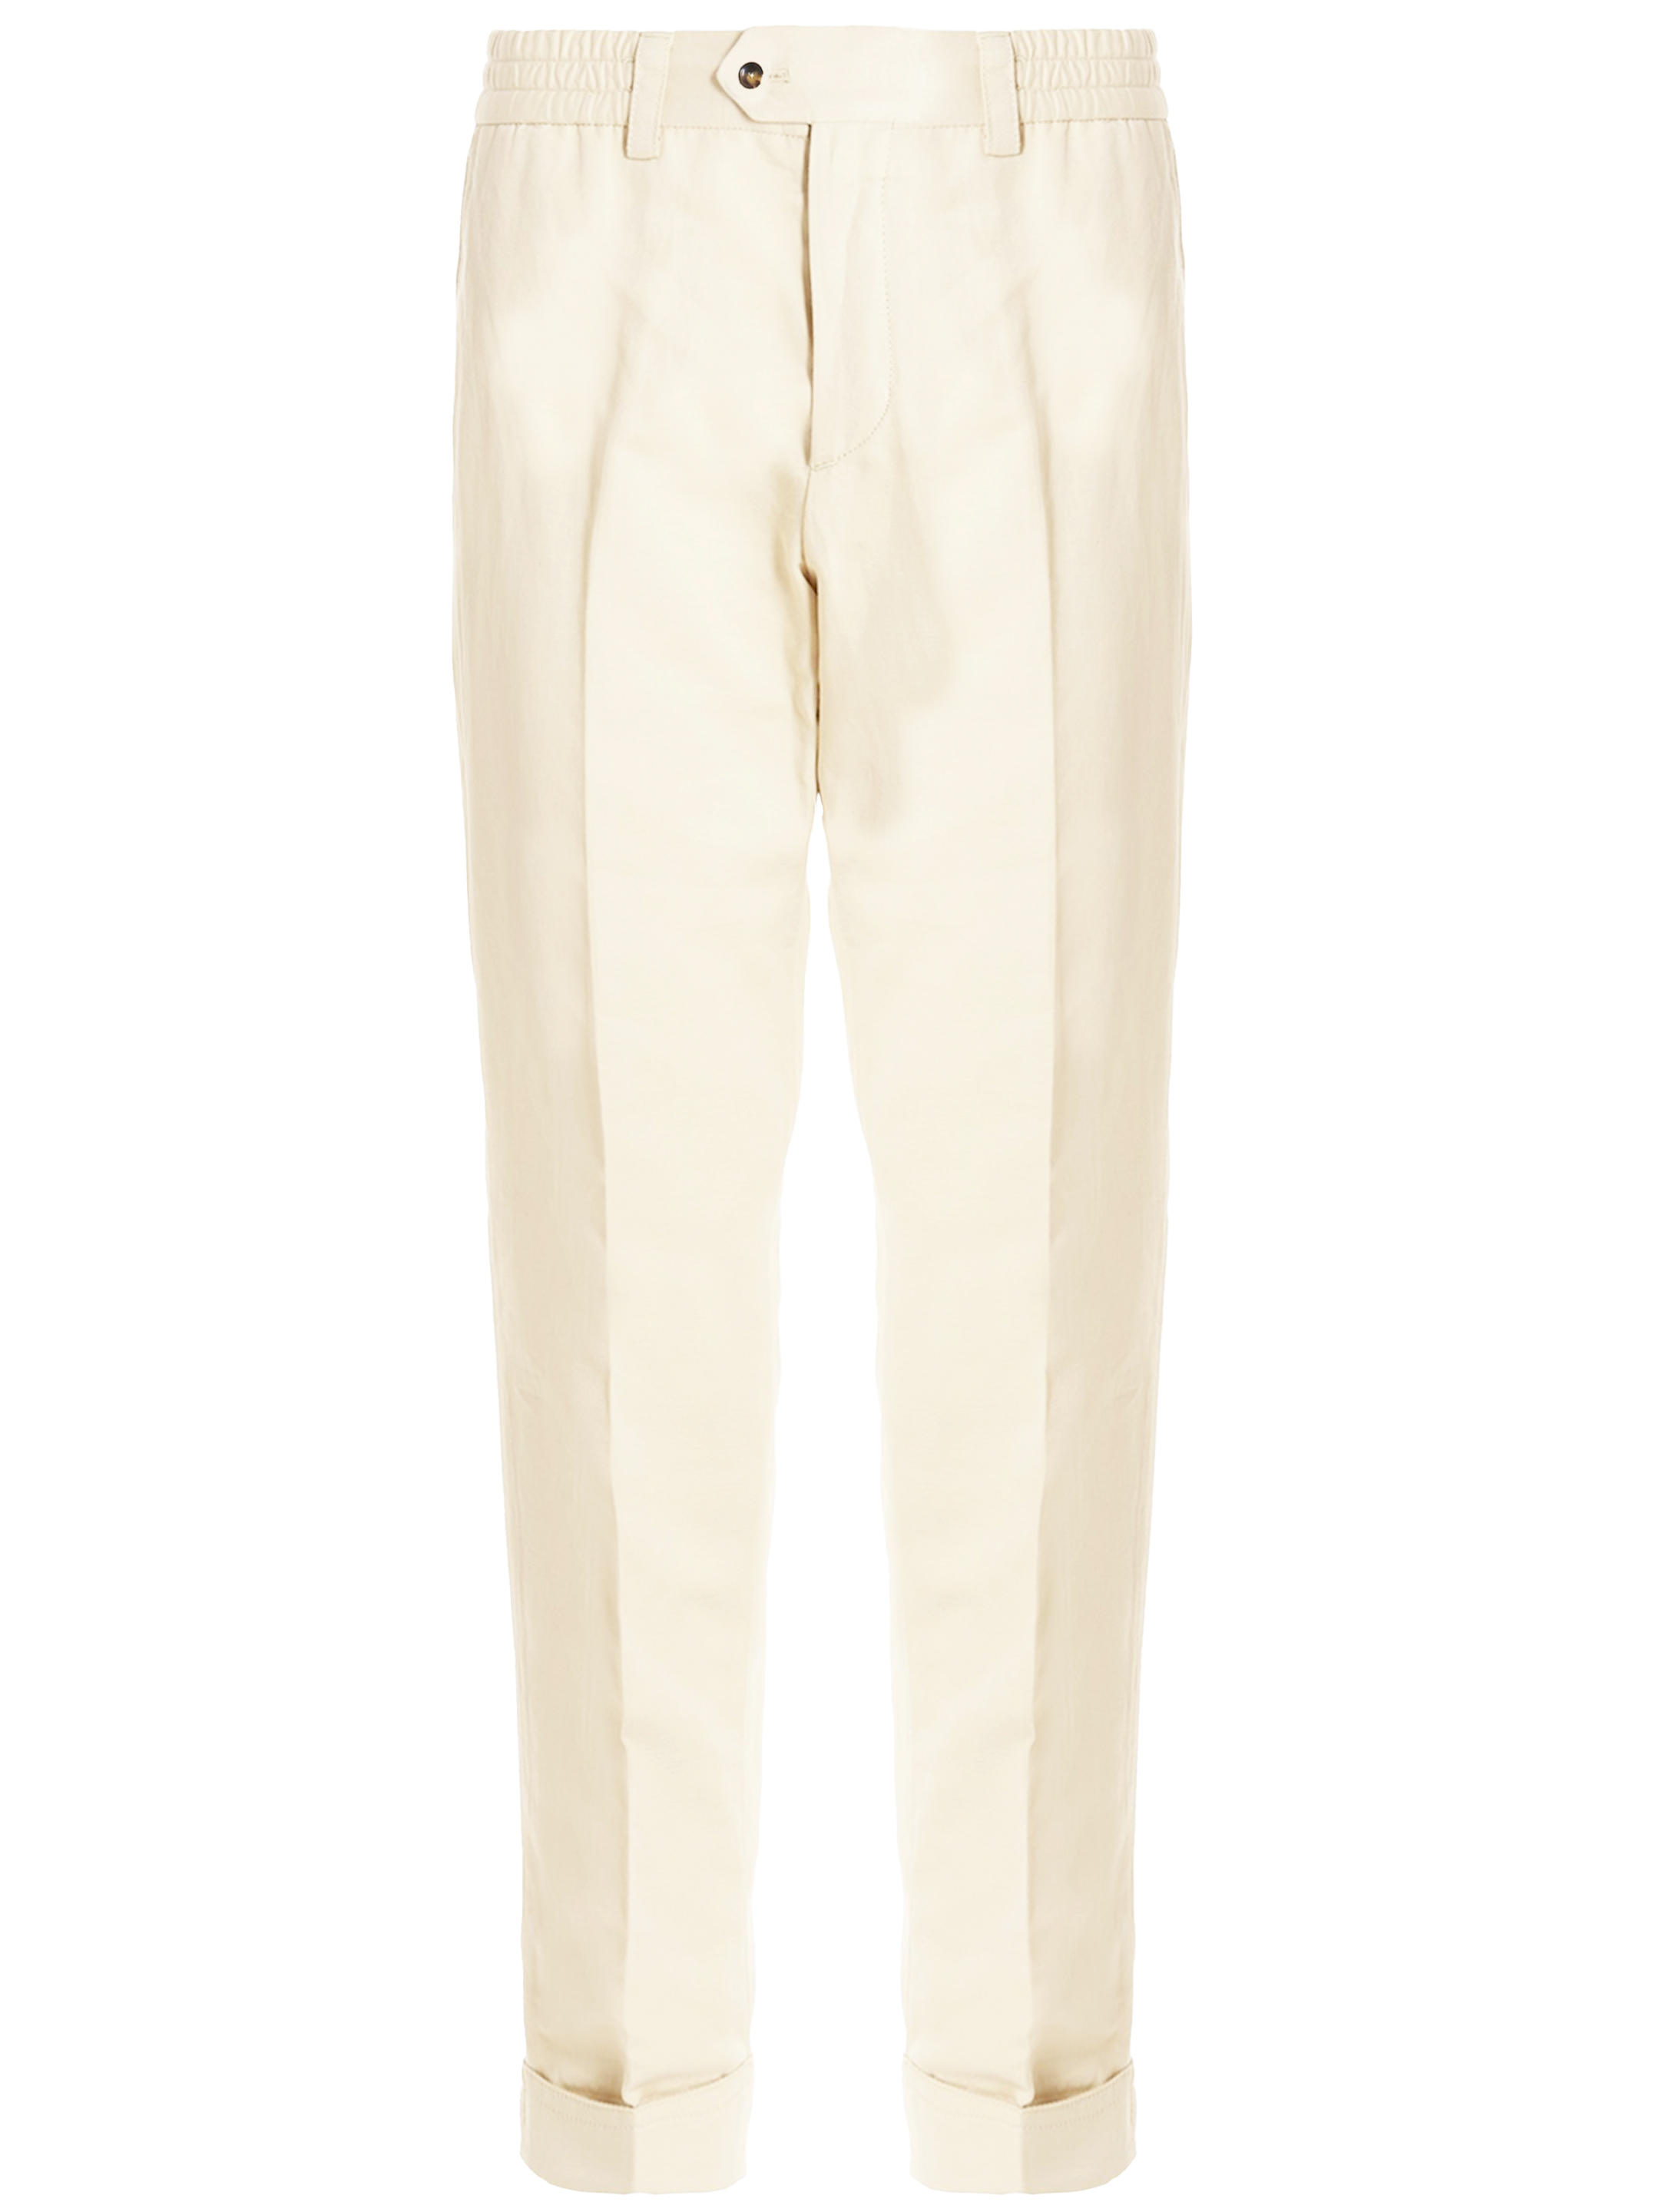 Pt Torino Cotton And Linen Trousers In Cream